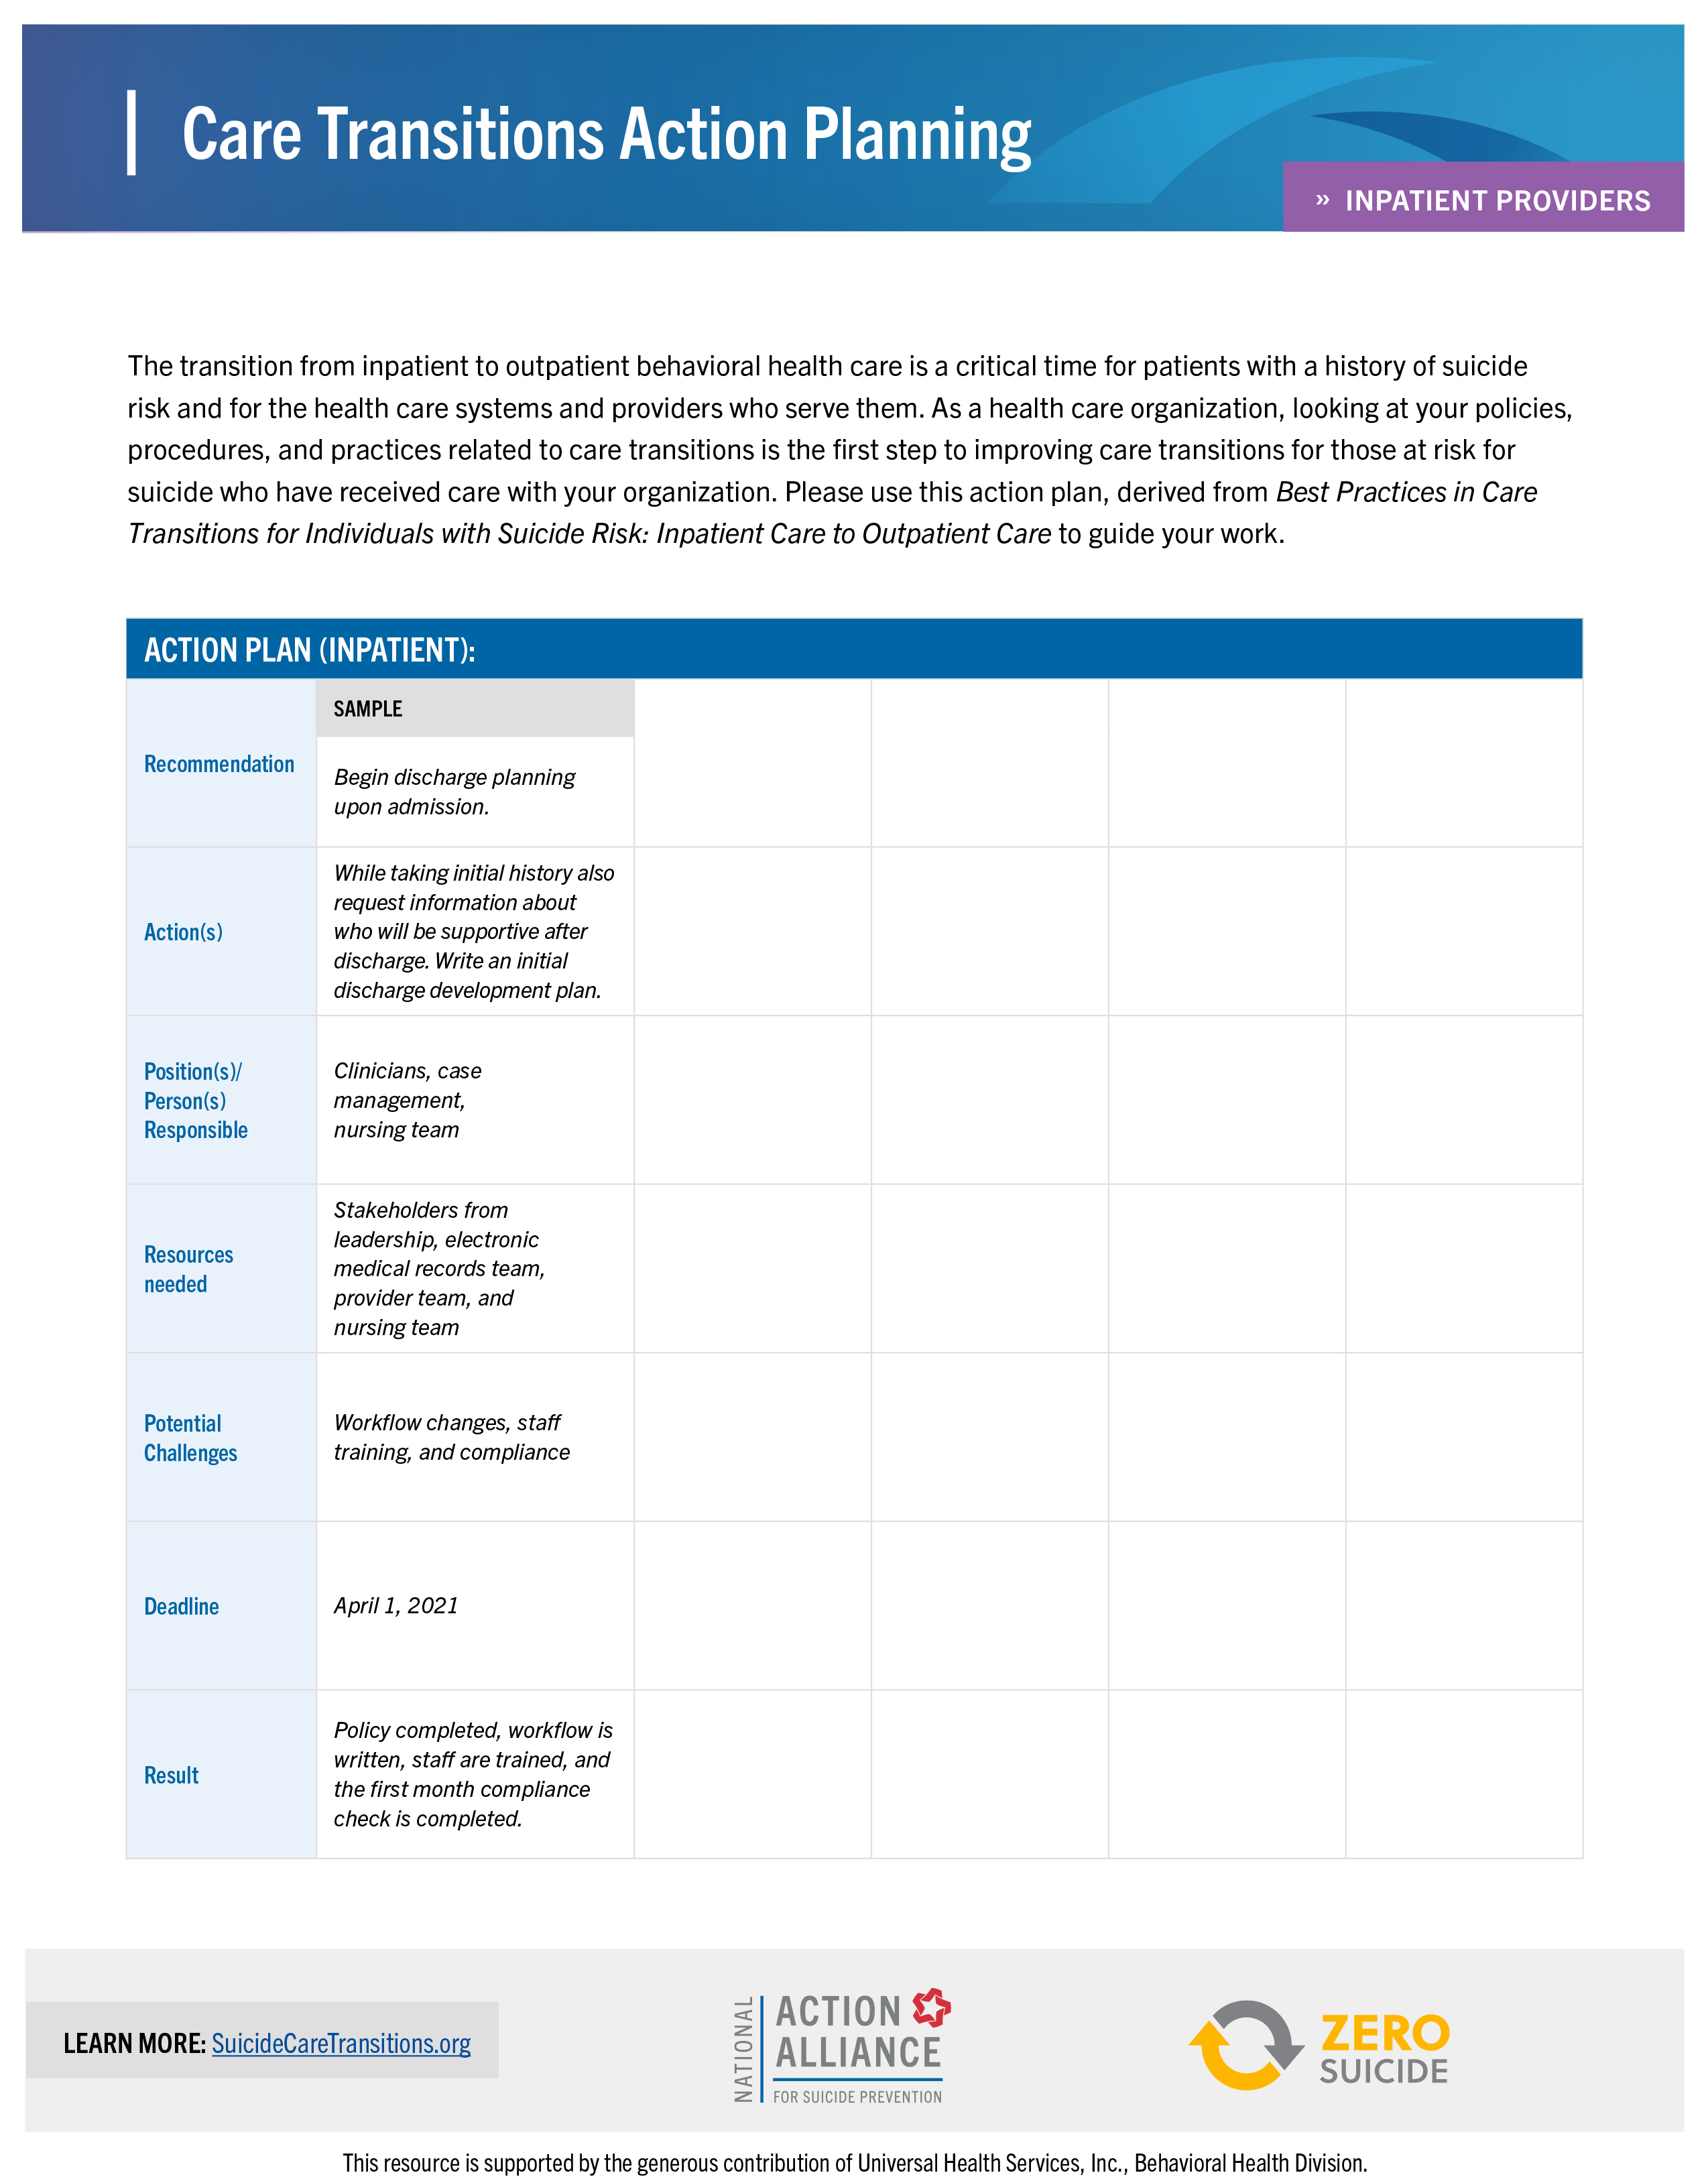 Inpatient Care Transitions Action Planning Template